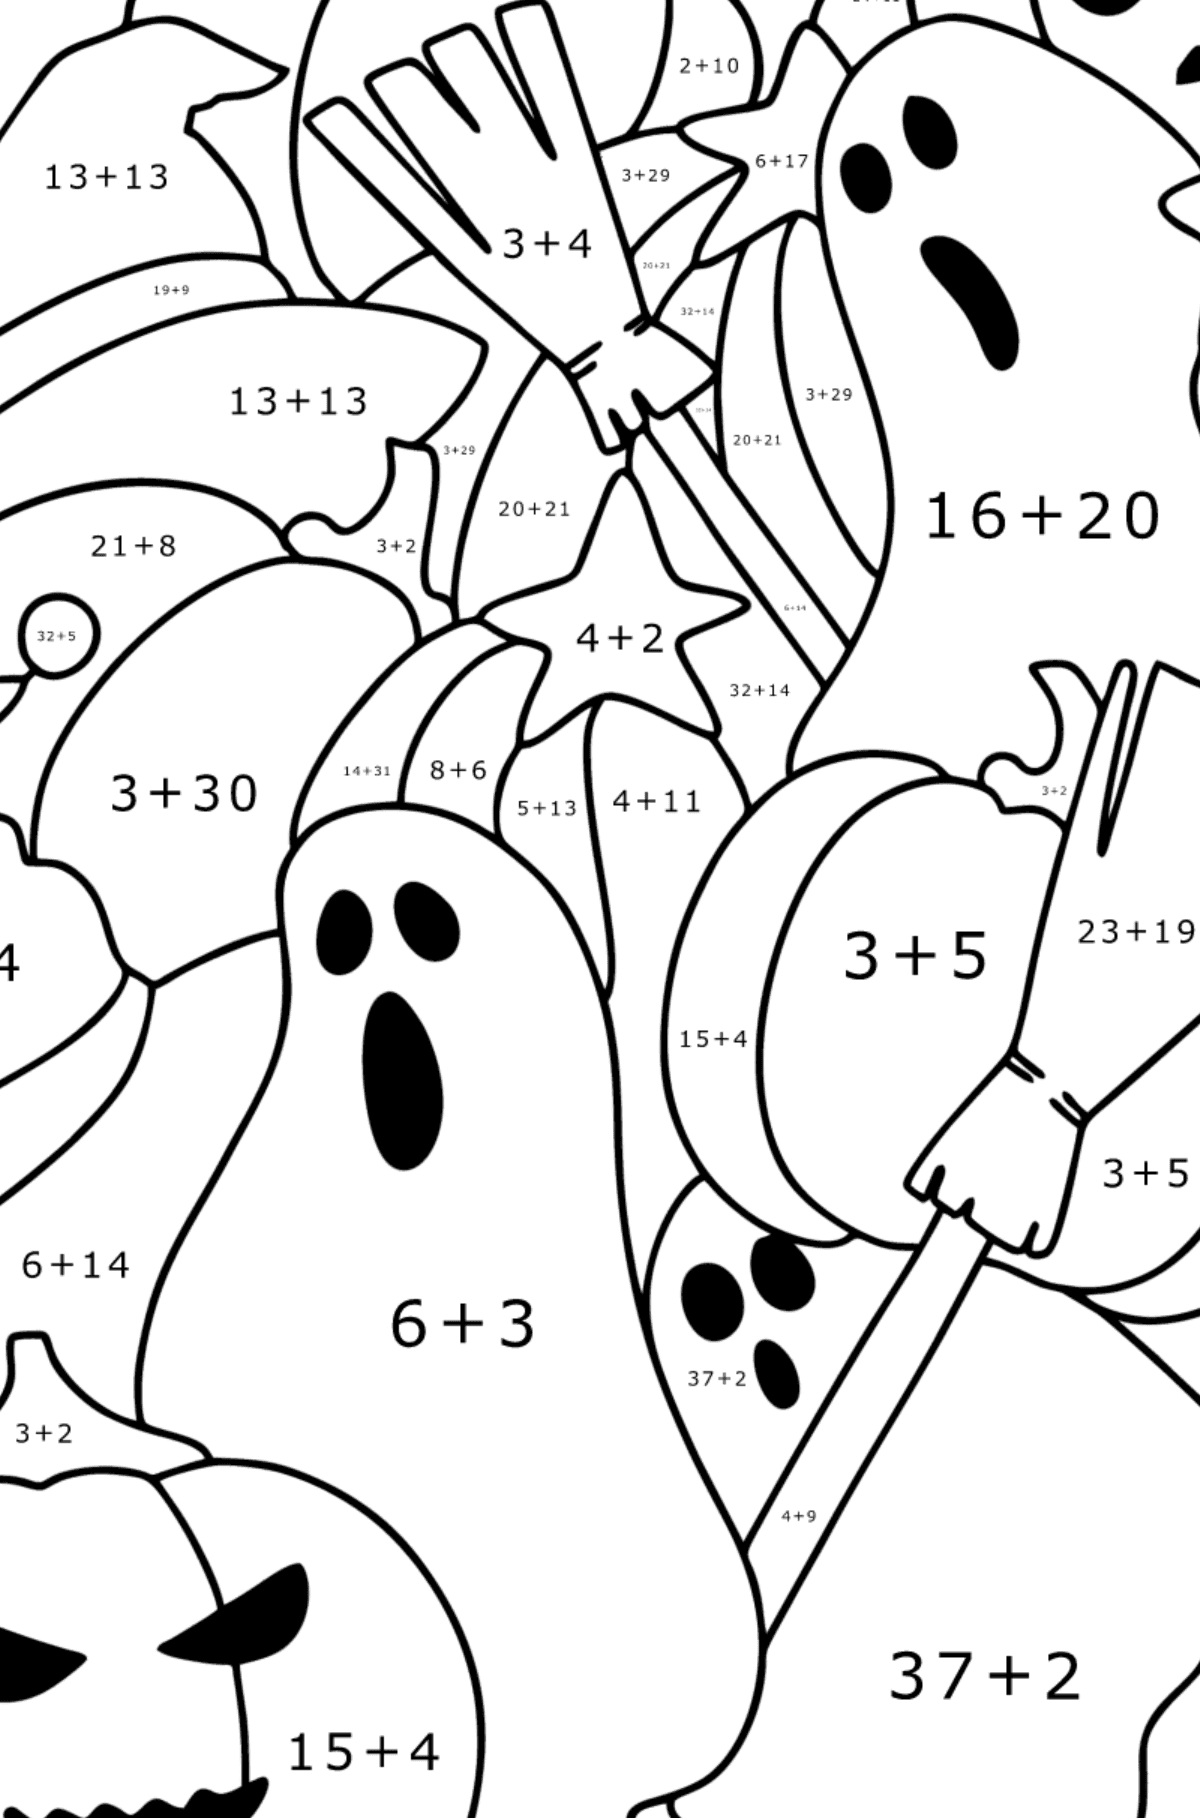 Doodle Сoloring page for Kids - Halloween - Math Coloring - Addition for Kids